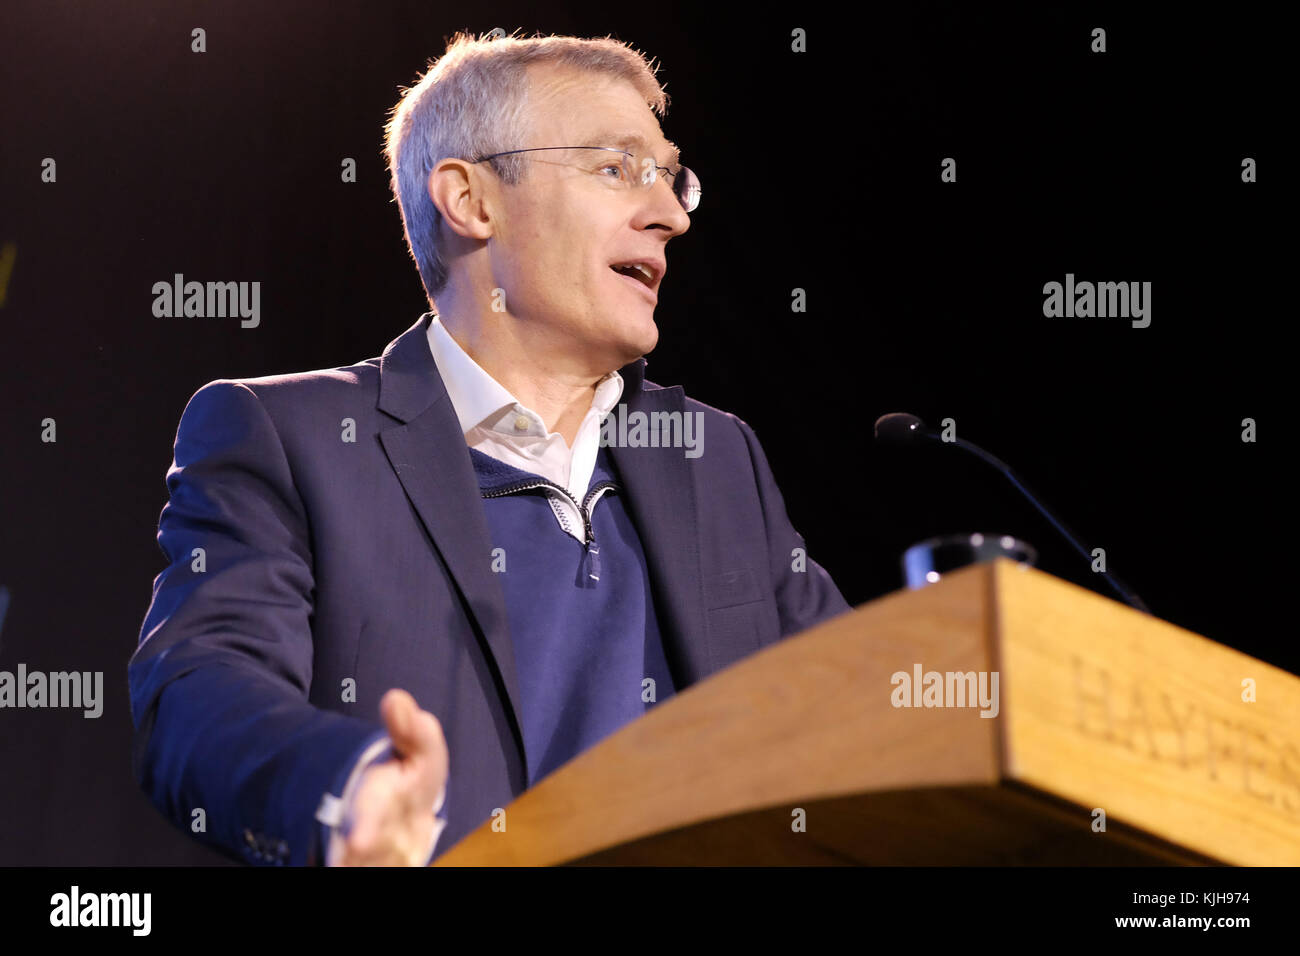 Hay Festival Winter Weekend - November 2017 - Broadcaster Jeremy Vine on stage talking about his new book What I Learnt about his experiences with callers to his Radio 2 program - Steven May/Alamy Live News Stock Photo